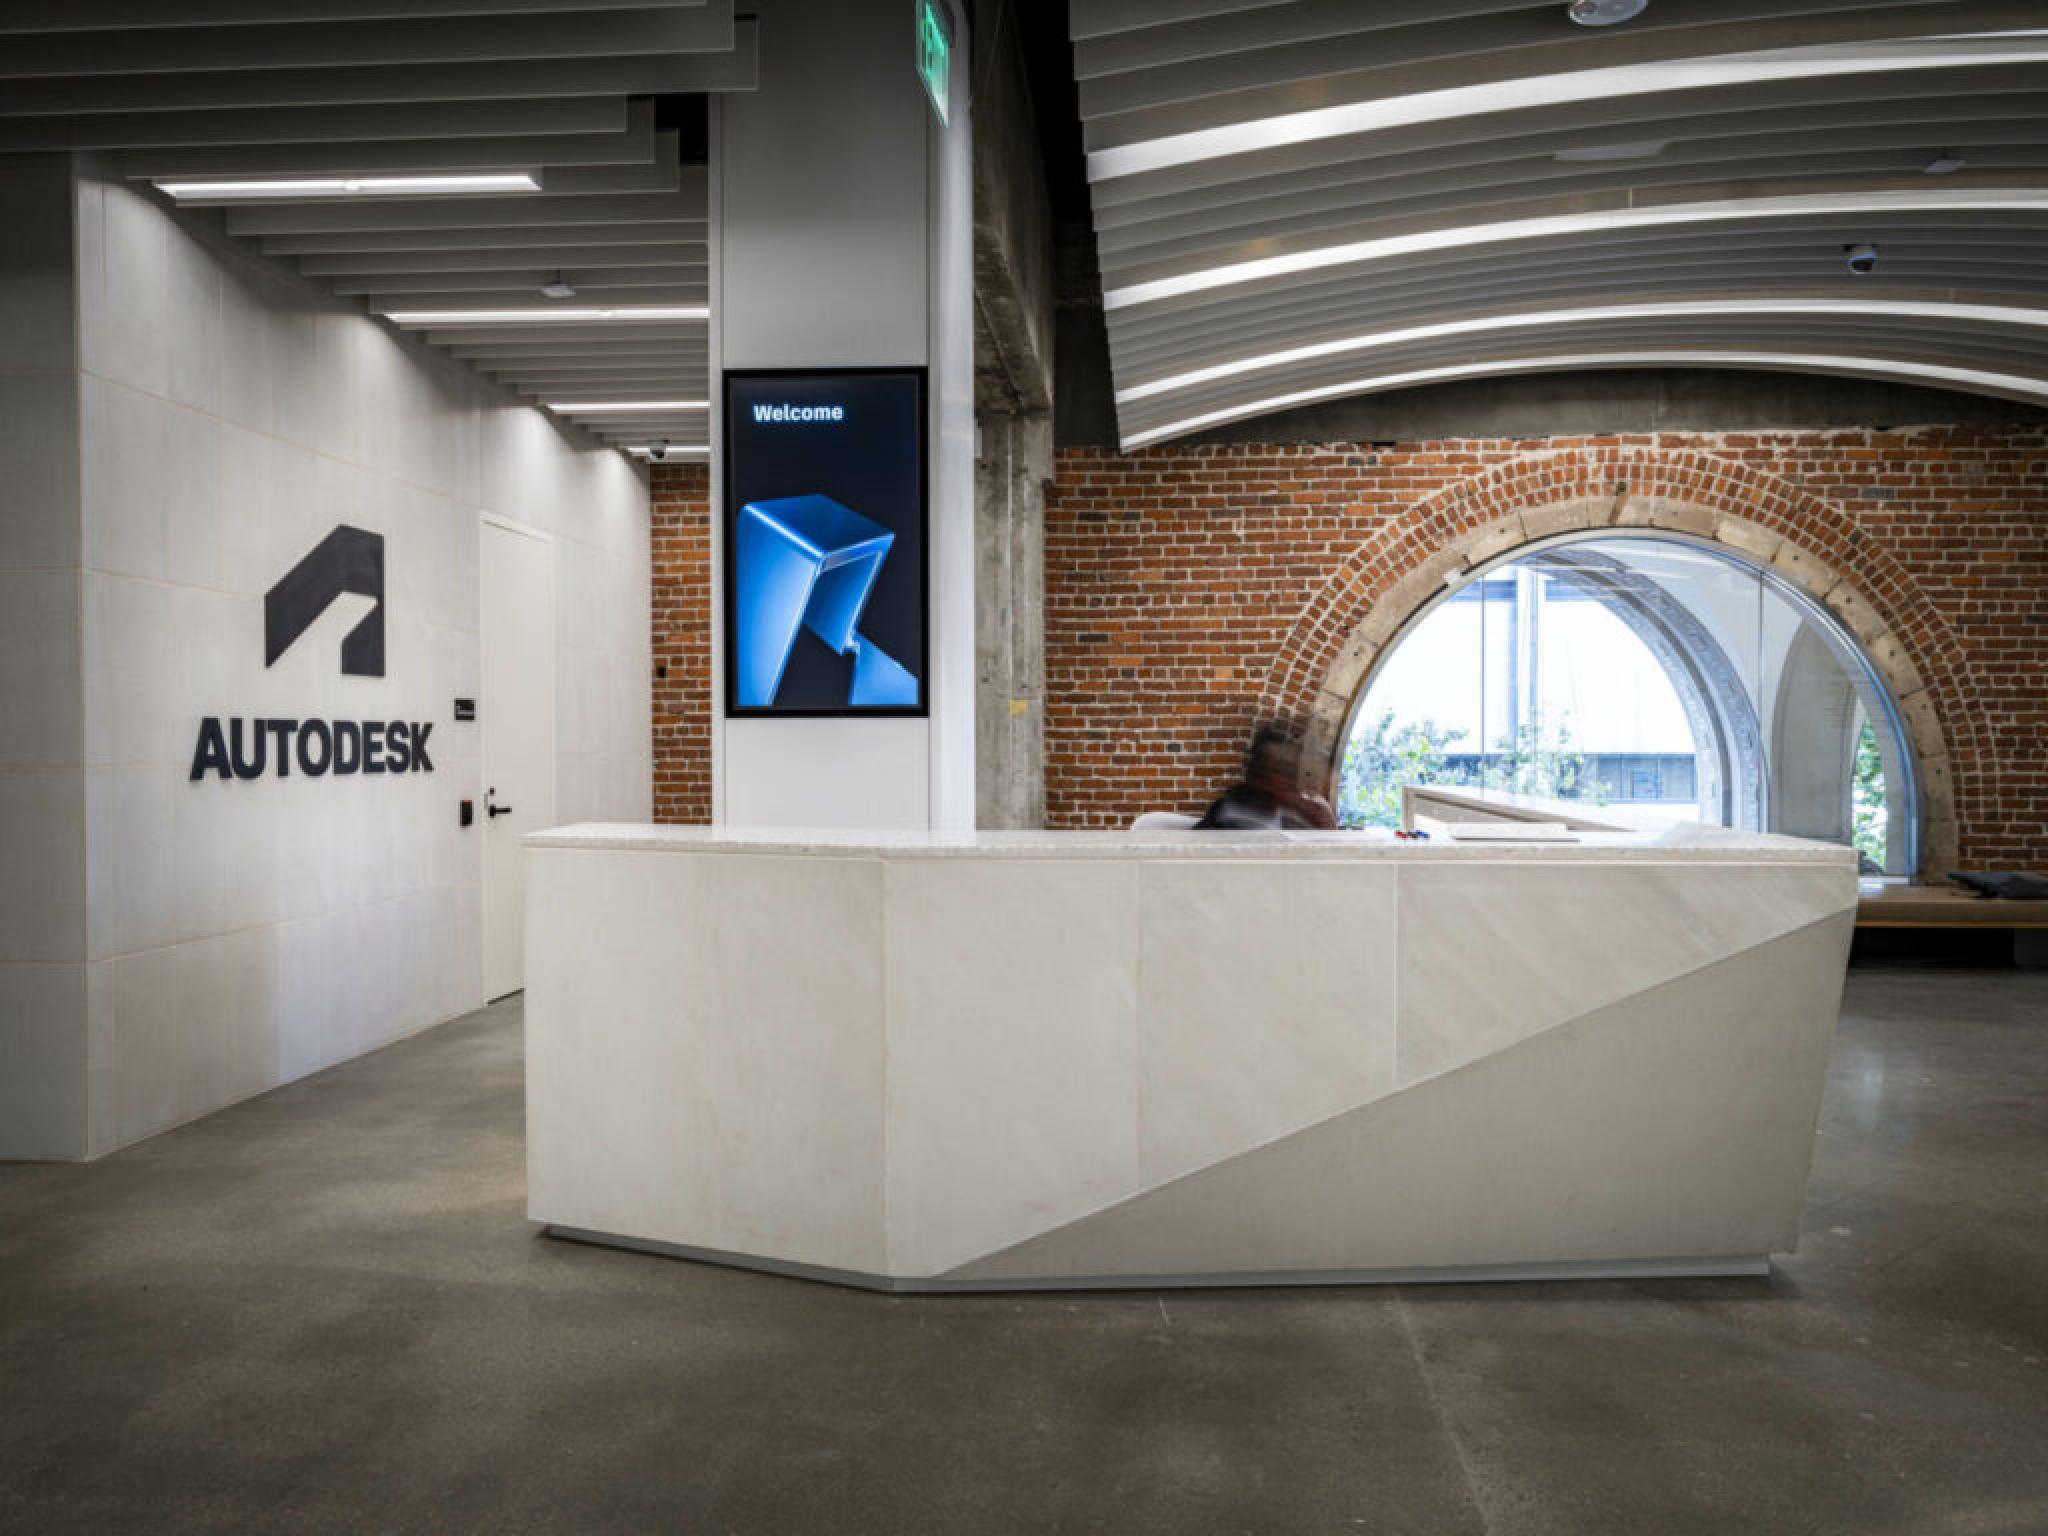  autodesk-stock-jumps-as-activist-investor-pushes-for-margin-improvement-board-changes-the-details 